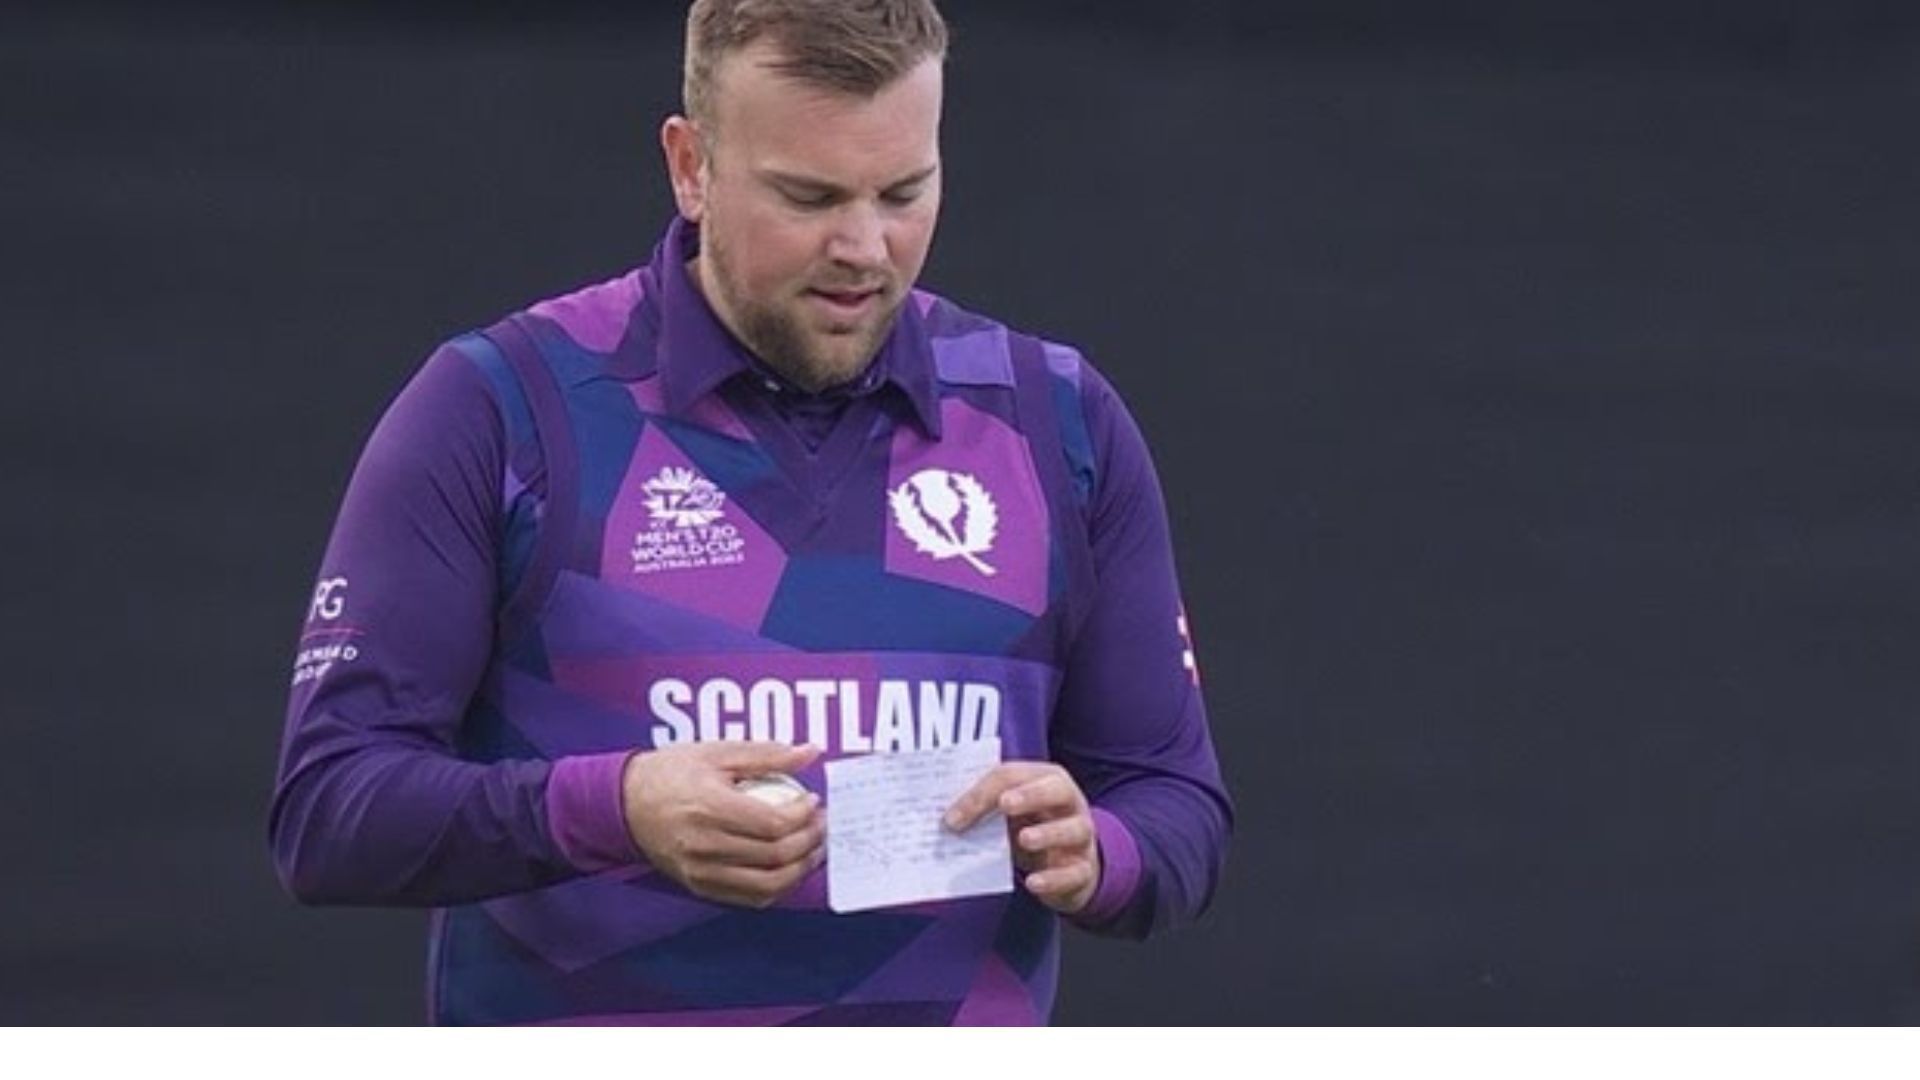 Mark Watt was seen carrying a piece of paper during the SCO-WI game